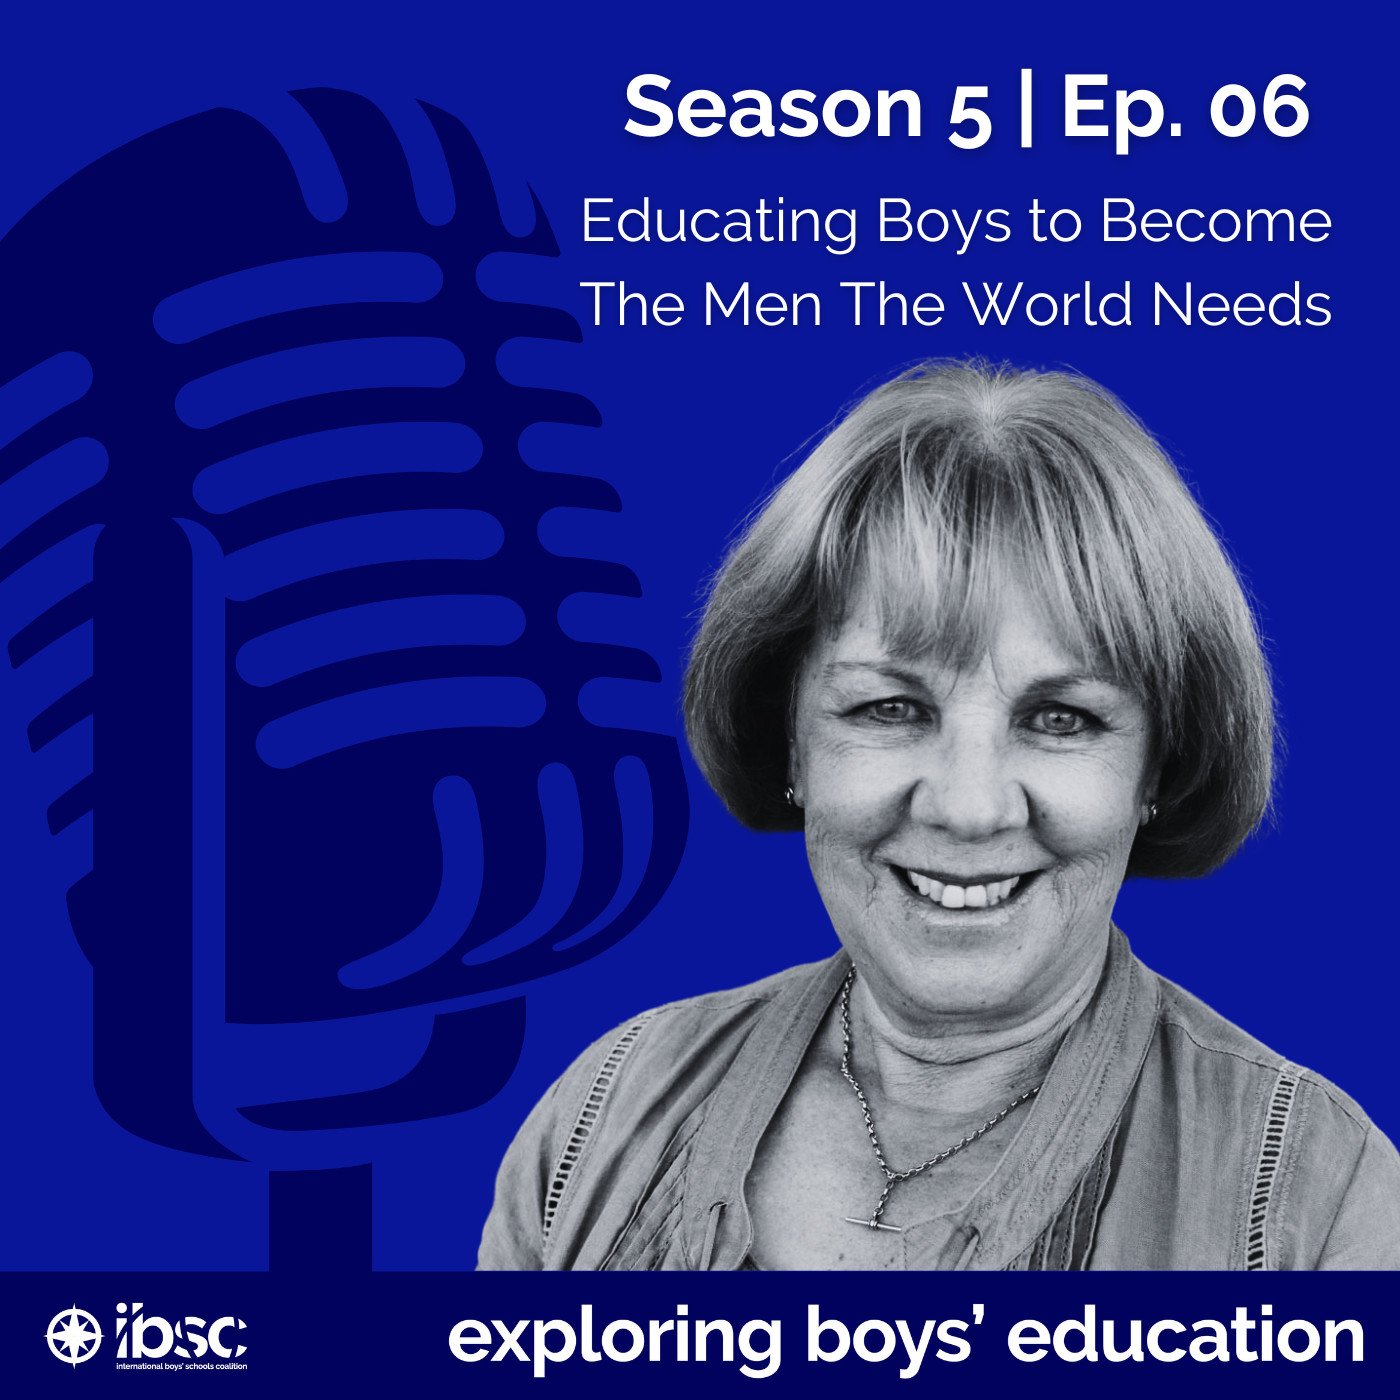 S5/Ep.06 - Educating Boys to Become the Men the World Needs